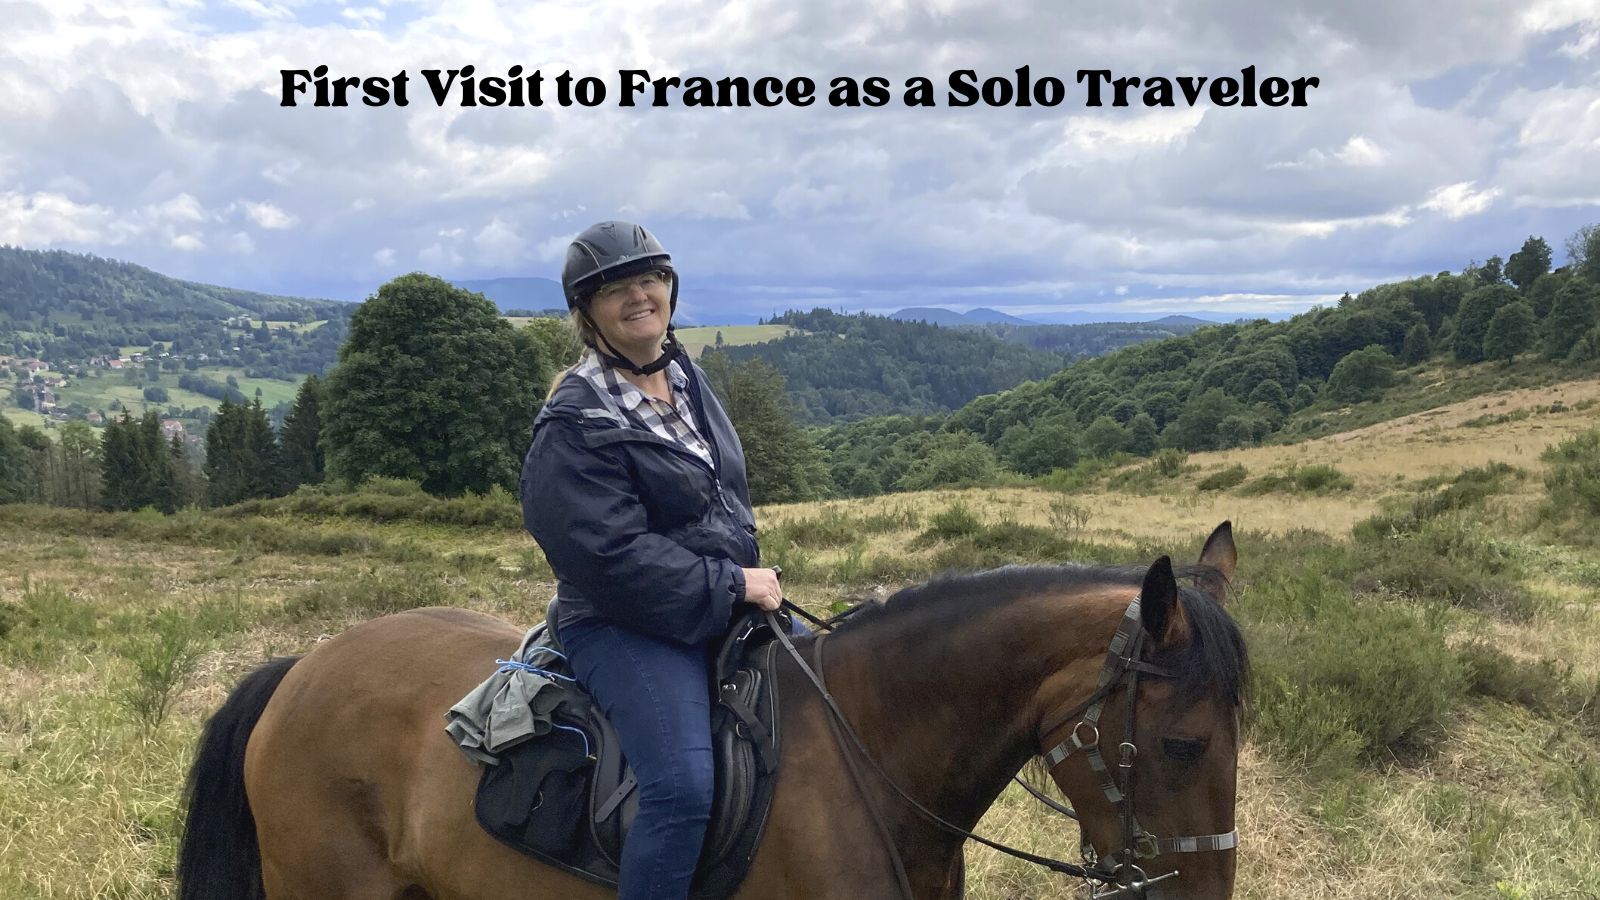 Casey on a horseback riding tour: First Visit to France as a Solo Traveler episode